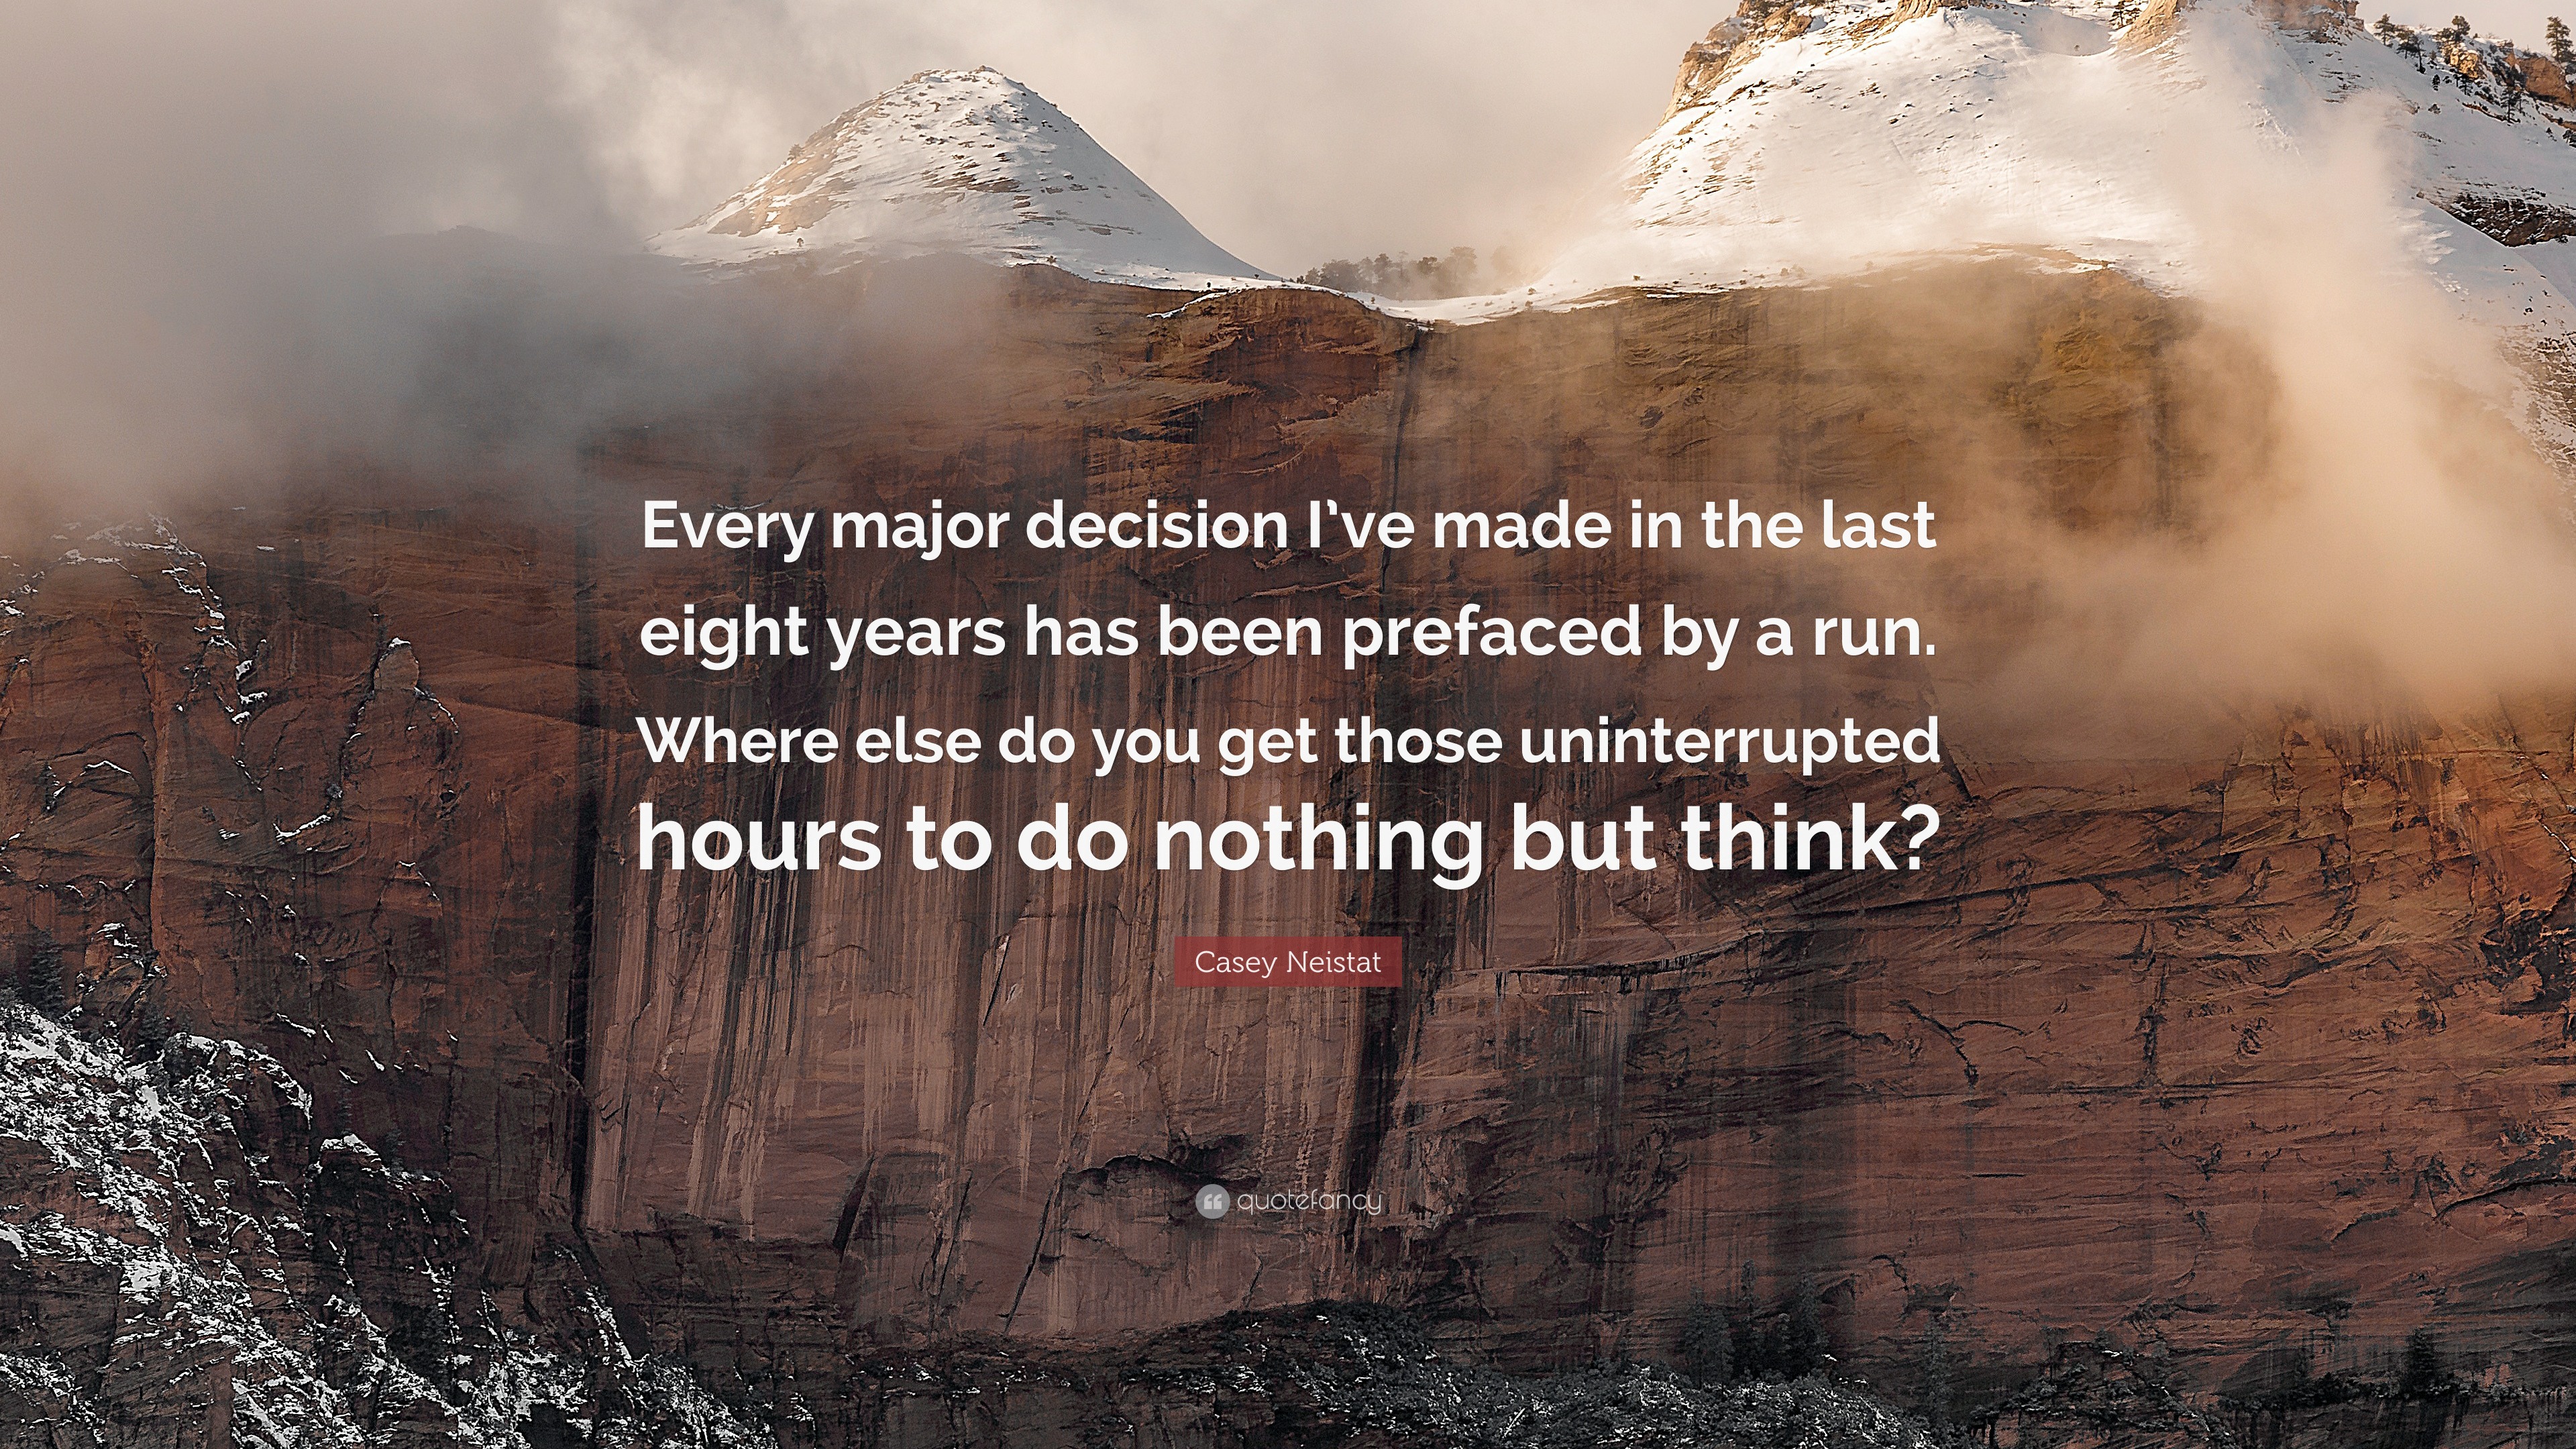 Casey Neistat Quote: "Every major decision I've made in the last eight years has been prefaced ...